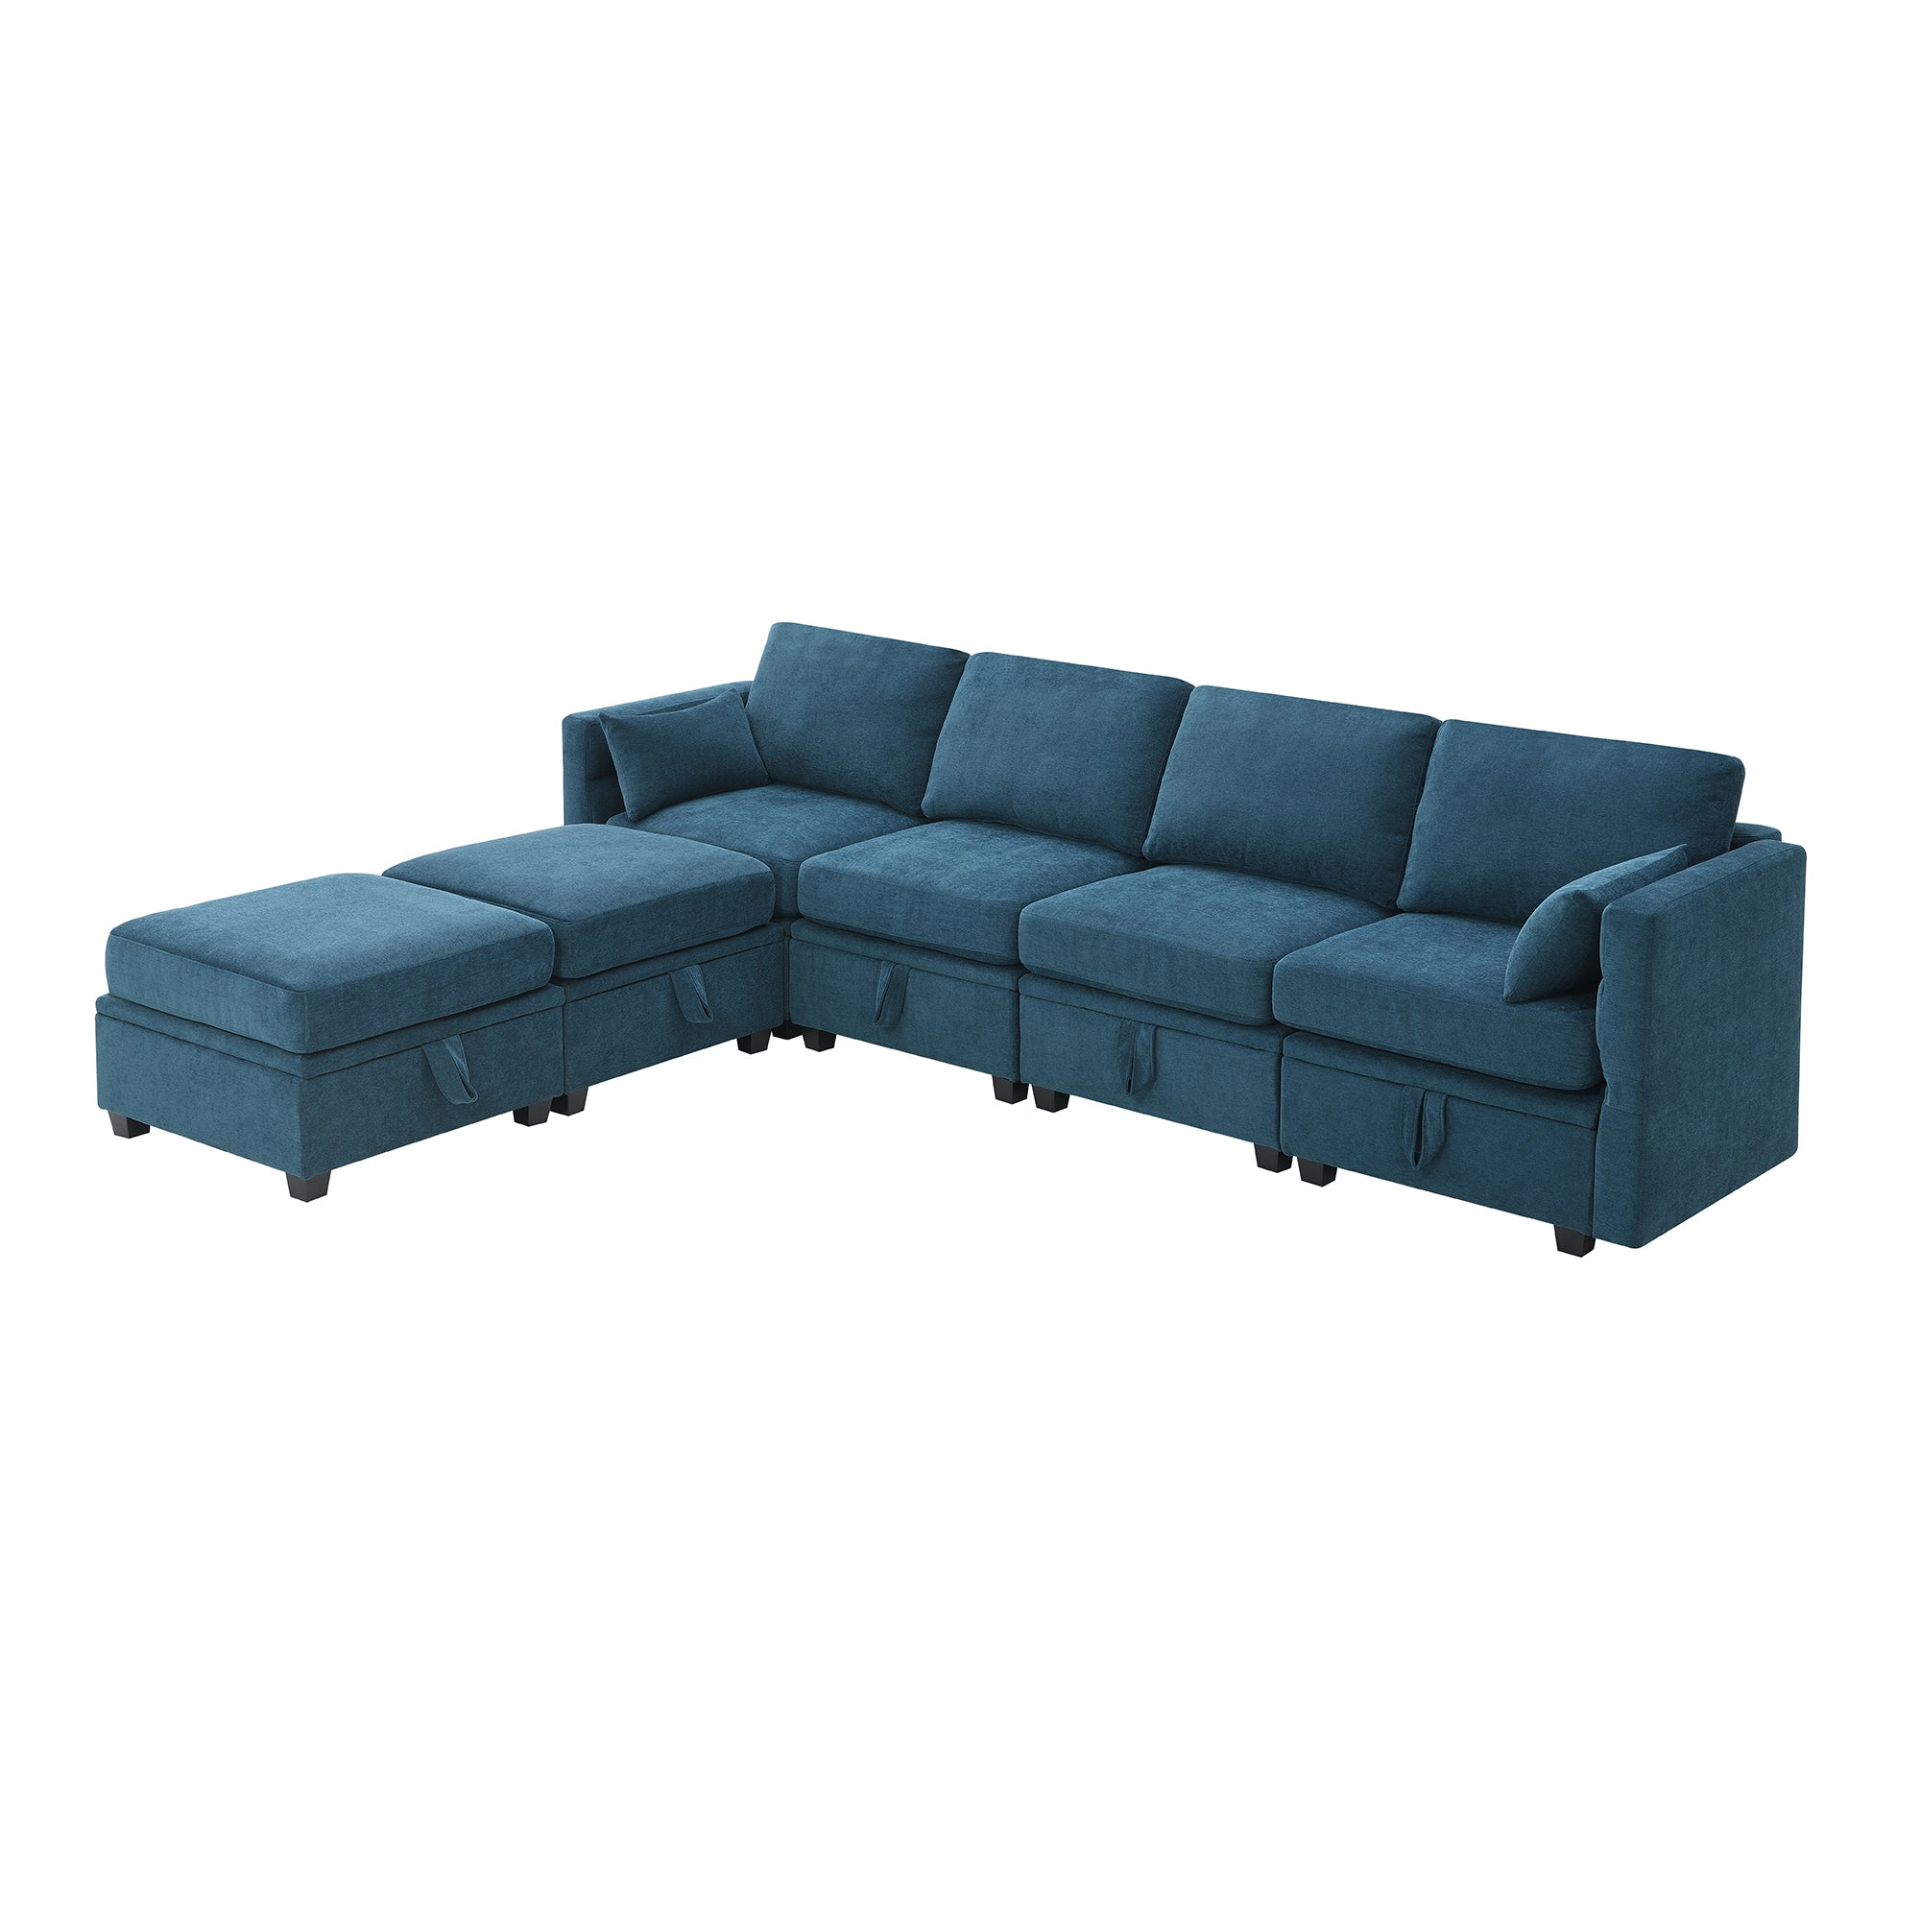 Blue - Trendy U-Shaped 6-Seat Chenille Modular Sectional Sofa with Storage, Adjustable Armrests and Backrests (109"x54")